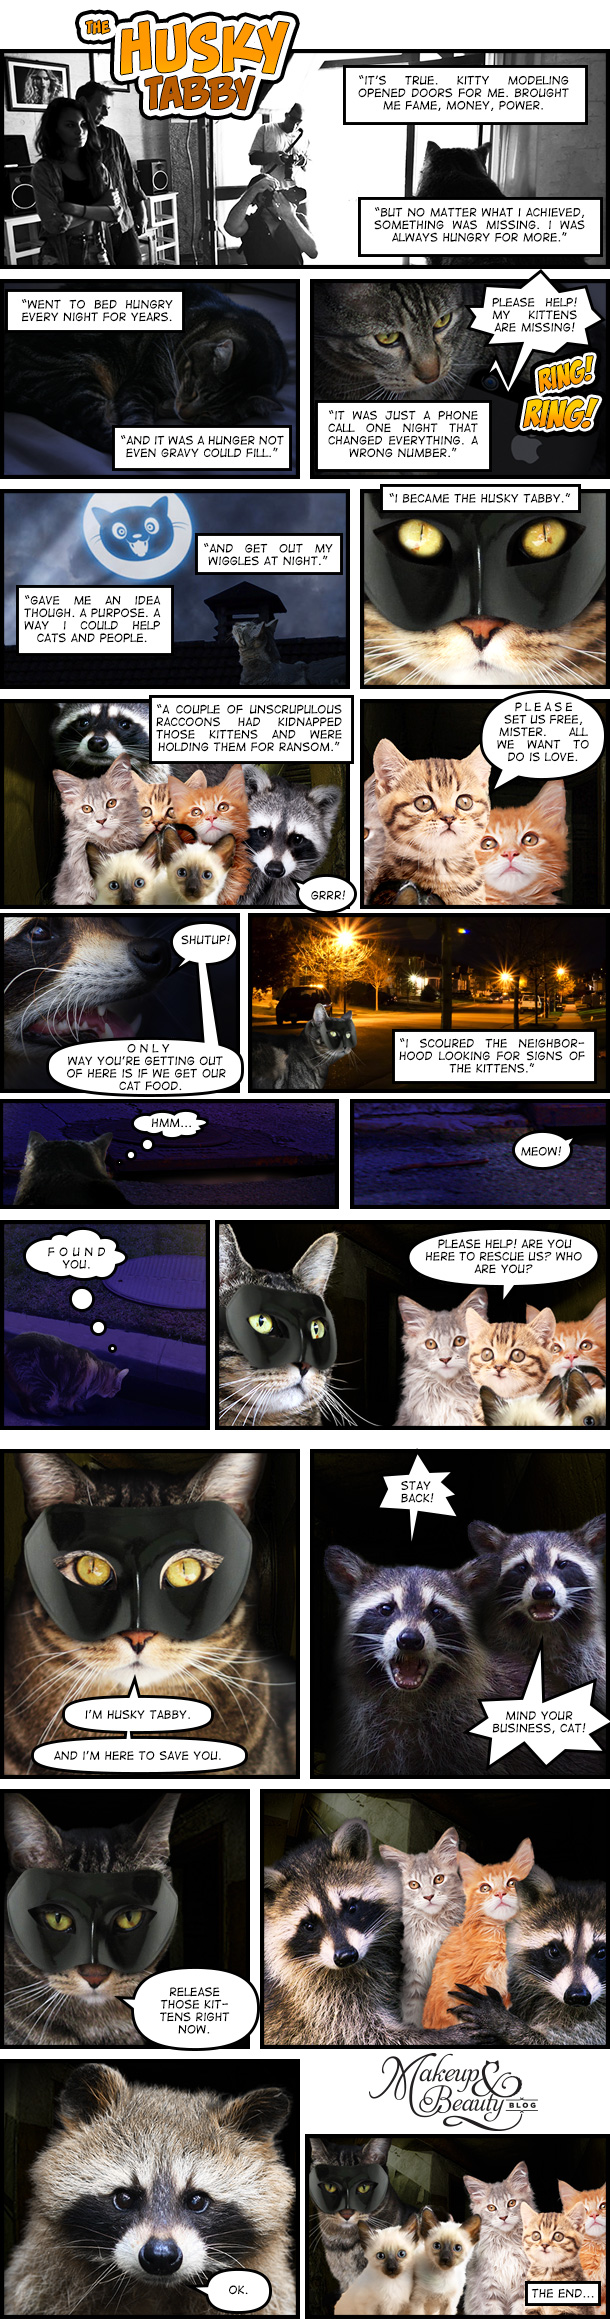 Tabs the Cat in The Husky Tabby: A Makeup and Beauty Blog Comic